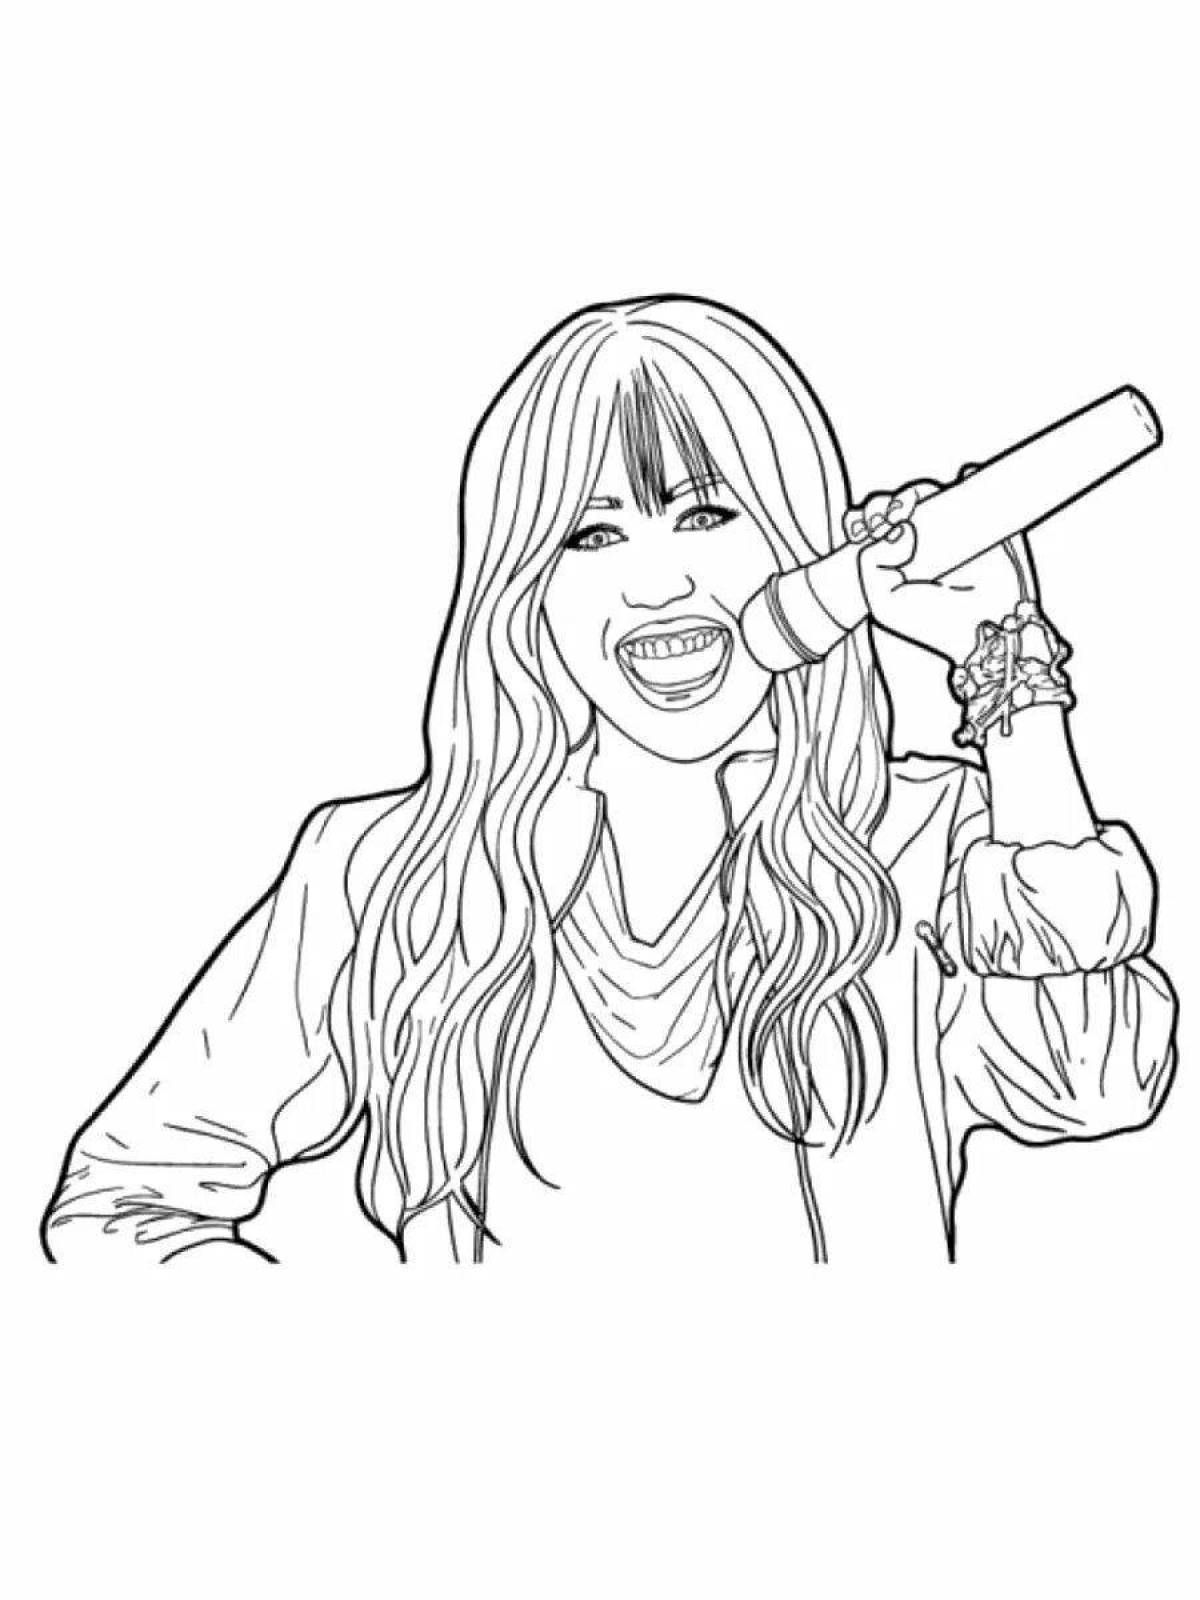 Funny singer coloring pages for kids